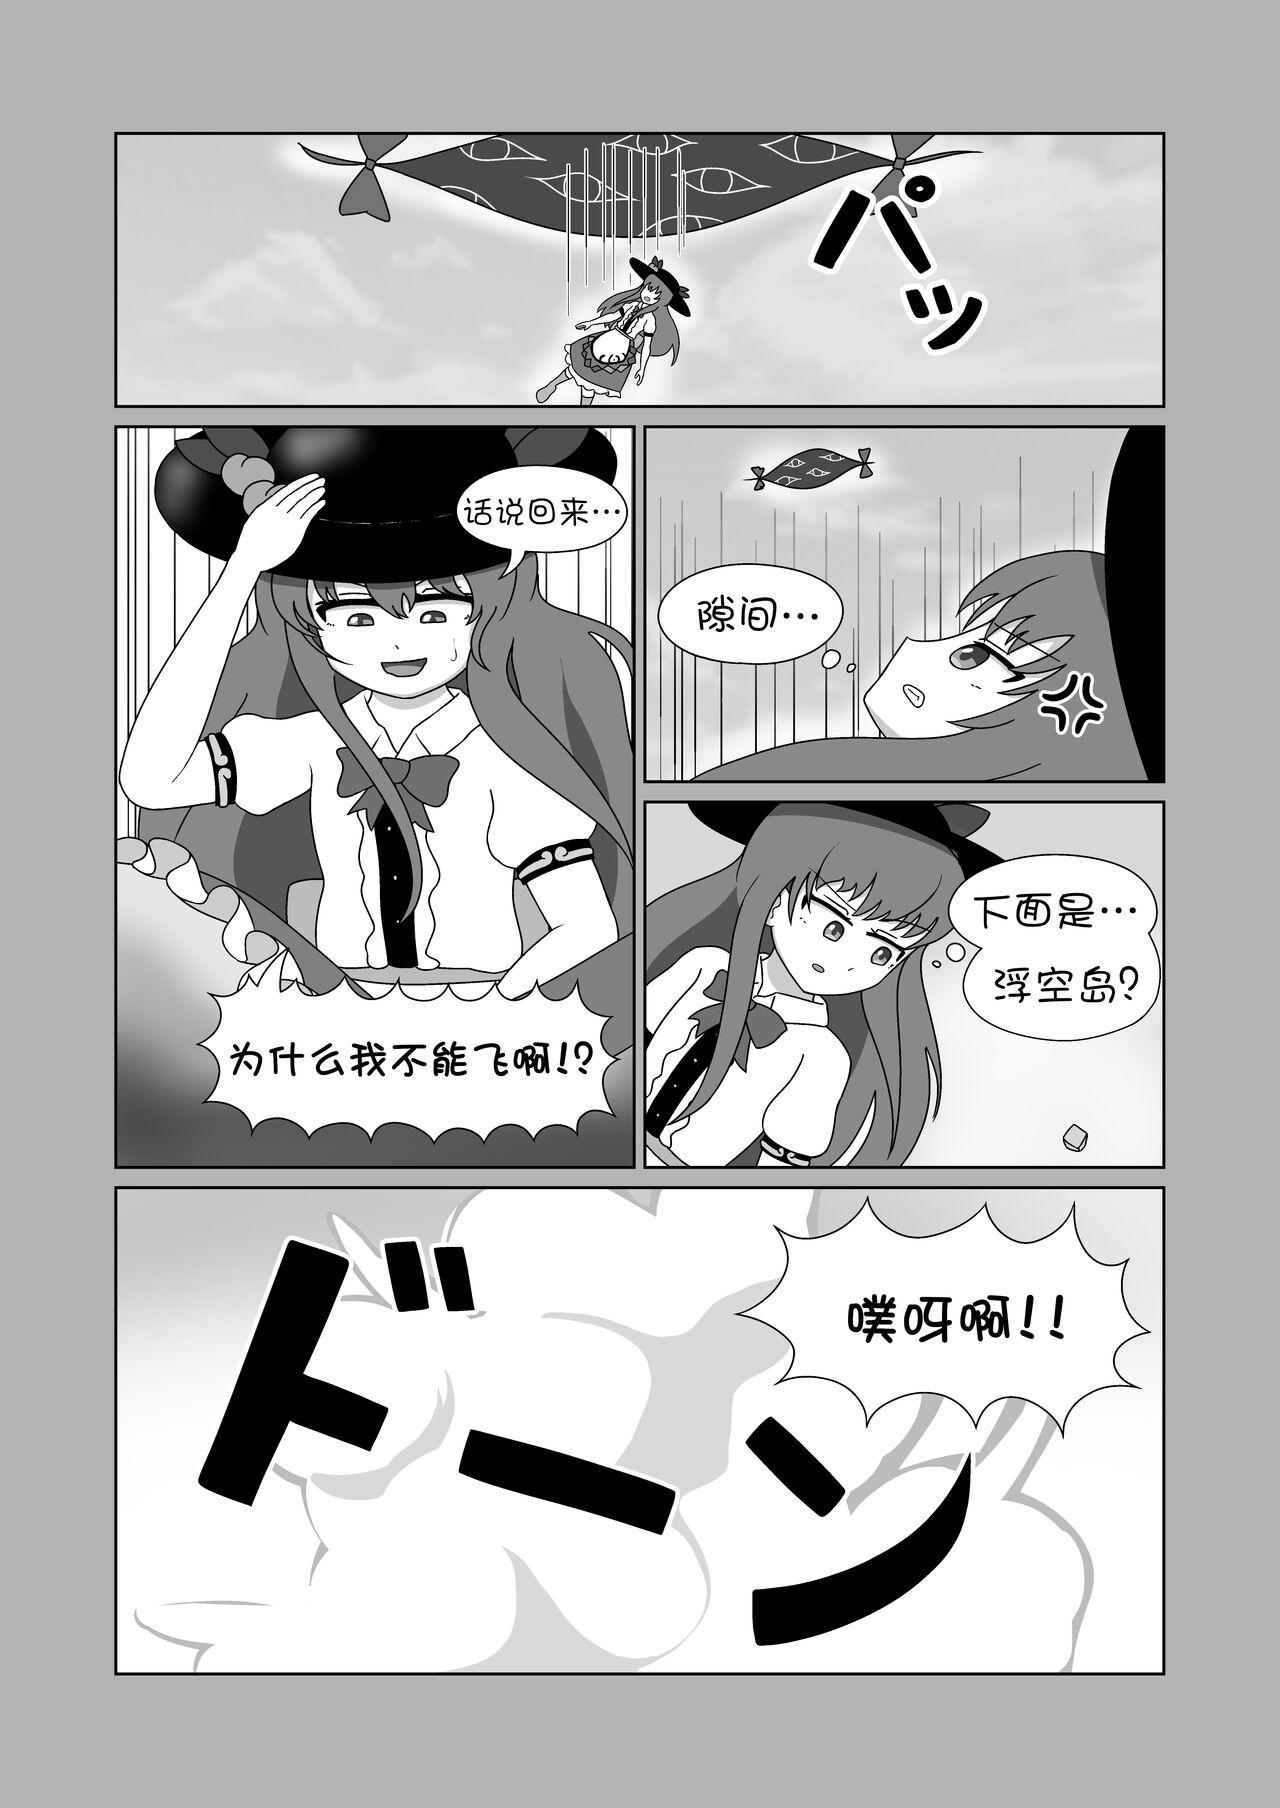 Girlongirl 天子 in BecomeFumo - Touhou project Camera - Page 4